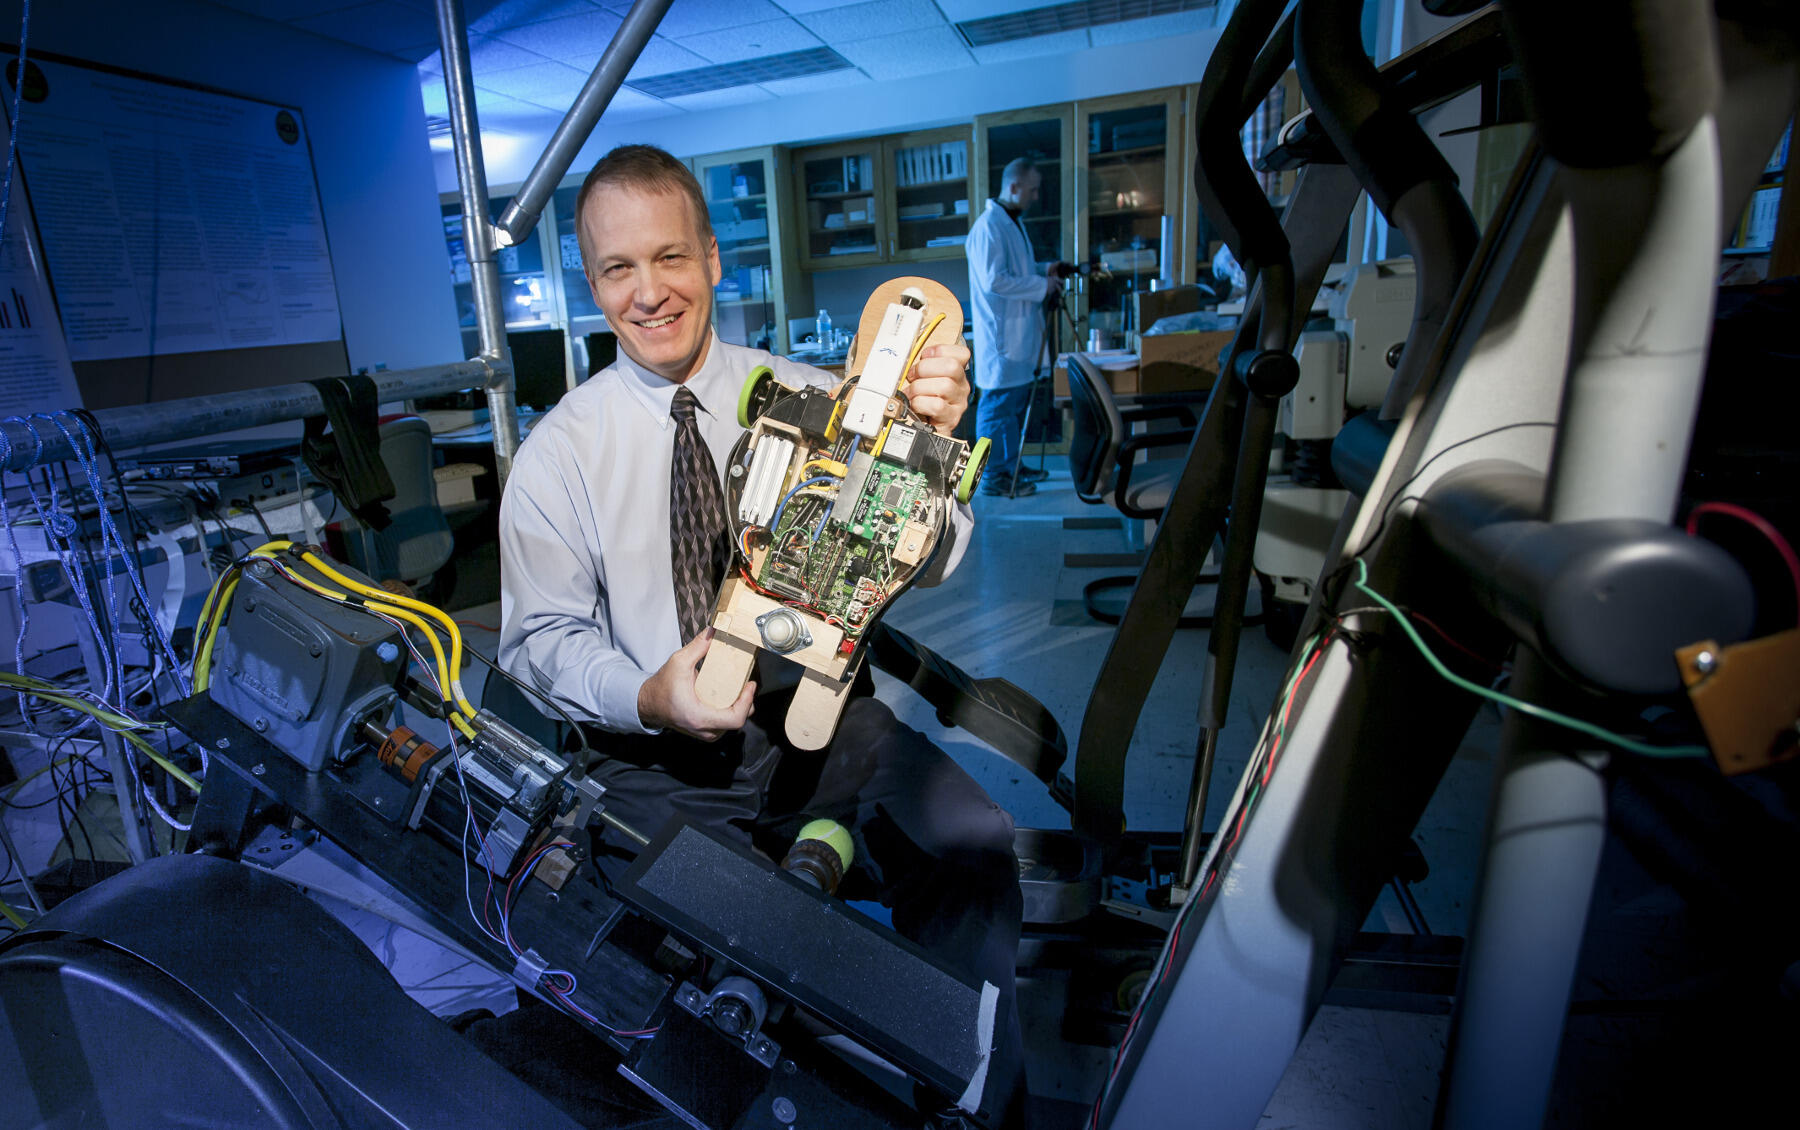 Peter Pidcoe, DPT, Ph.D., associate professor and assistant chair in the Department of Physical Therapy in the School of Allied Health Professions, will receive a grant to support the continuous development of the Self-Initiated Prone Progressive Crawler, a robotic system he is developing to promote movement, motor learning and environmental enrichment in children.